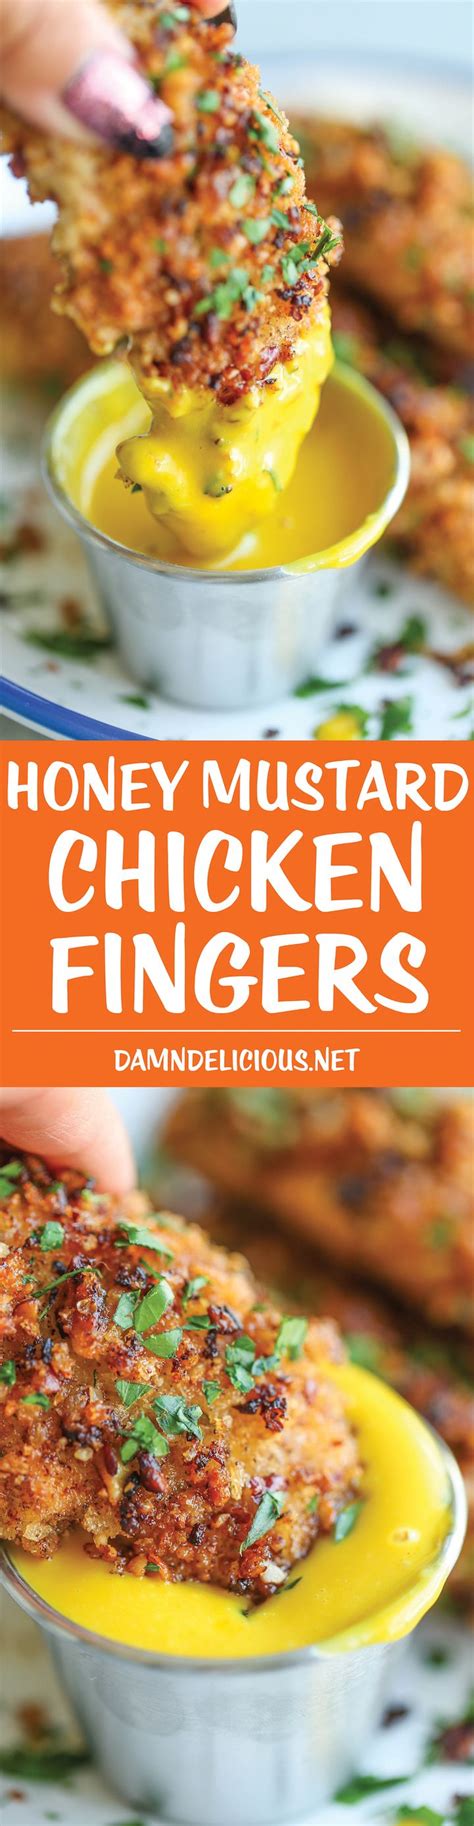 Shake off any excess and transfer to a lined baking sheet. Honey Mustard Chicken Fingers | Recipe | Food recipes, Cooking recipes, Food